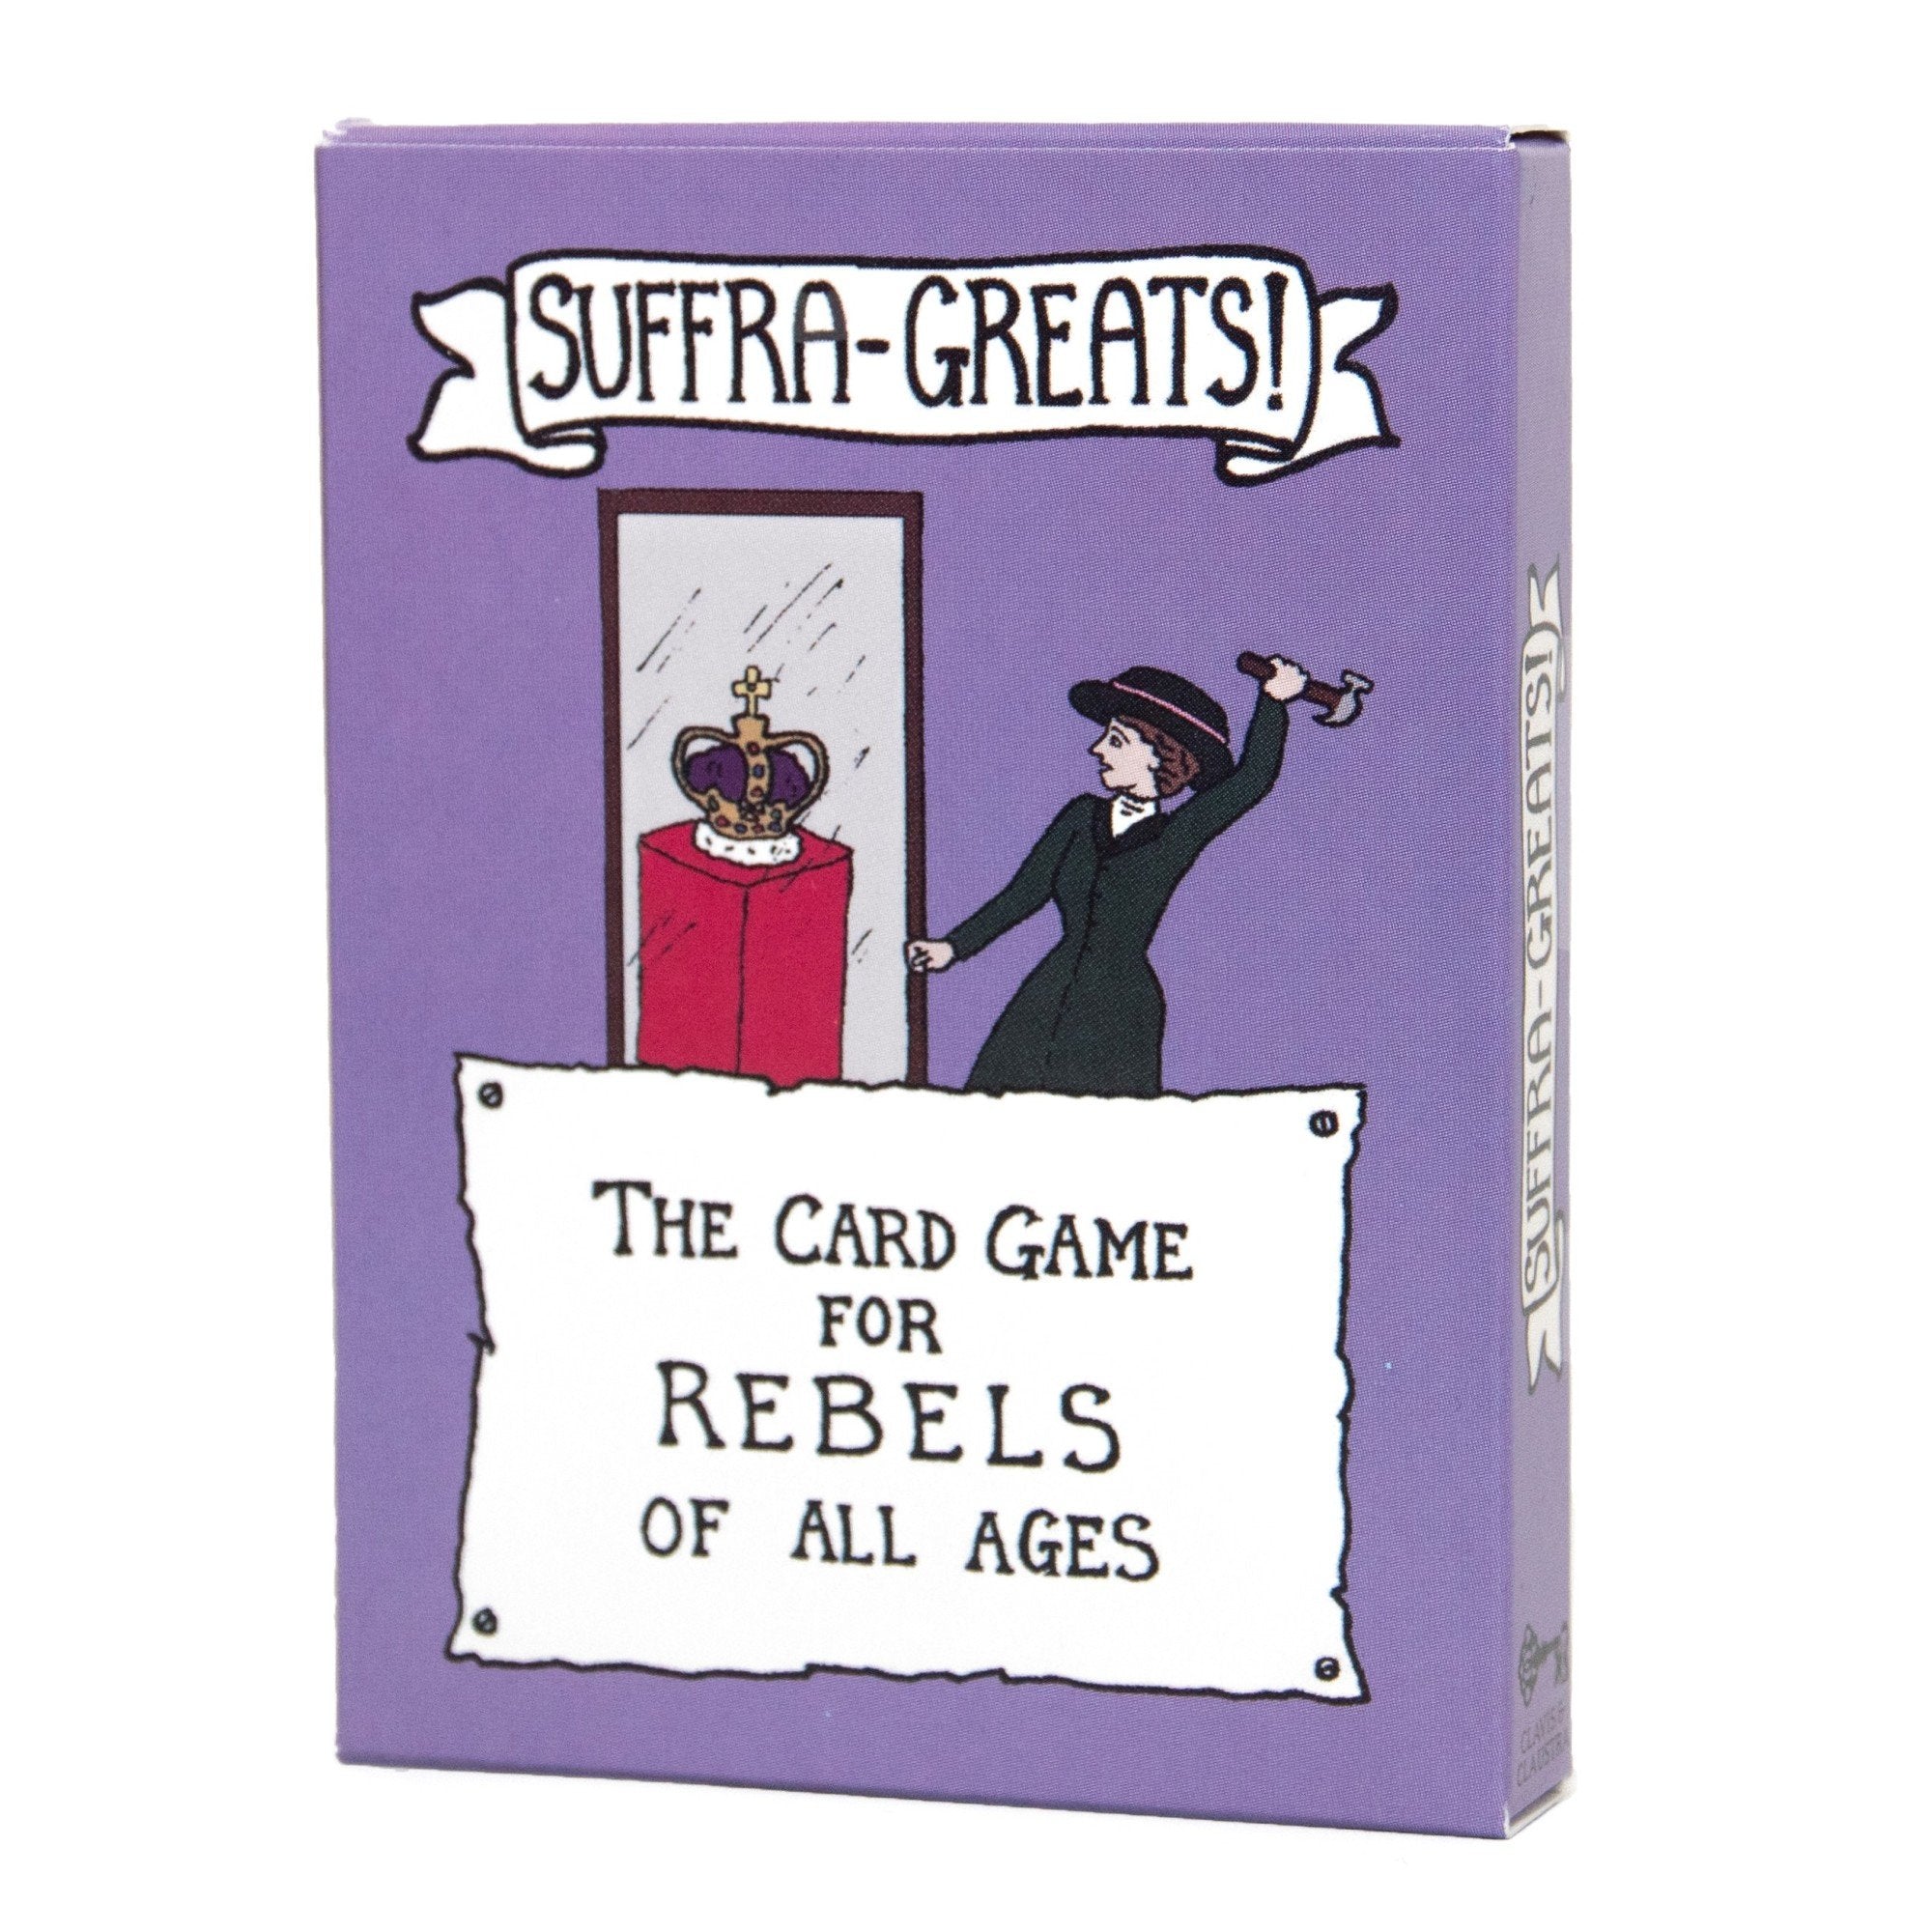 'Suffra-Greats!' Card Game Box